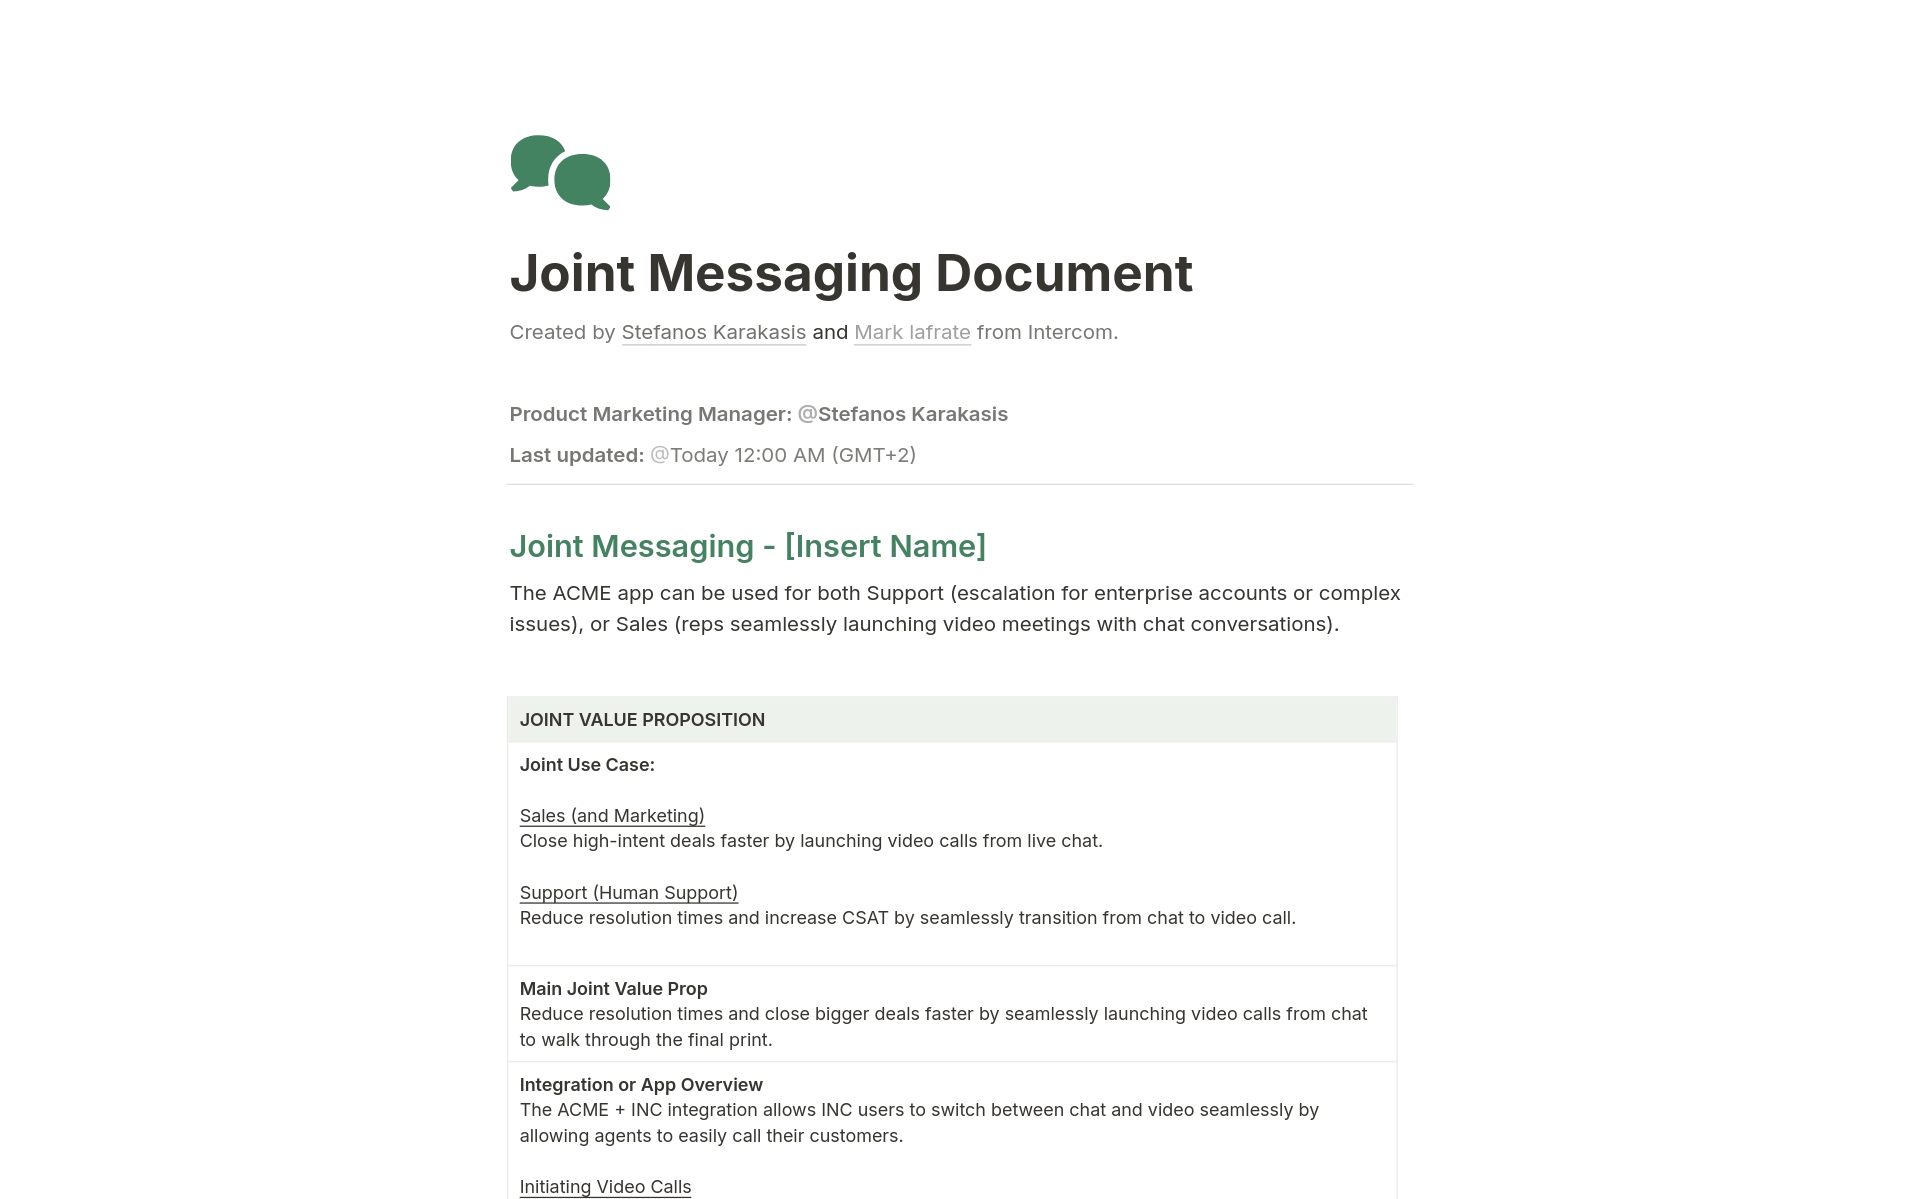 Create Joint Messaging Documents for key Partners in Notion